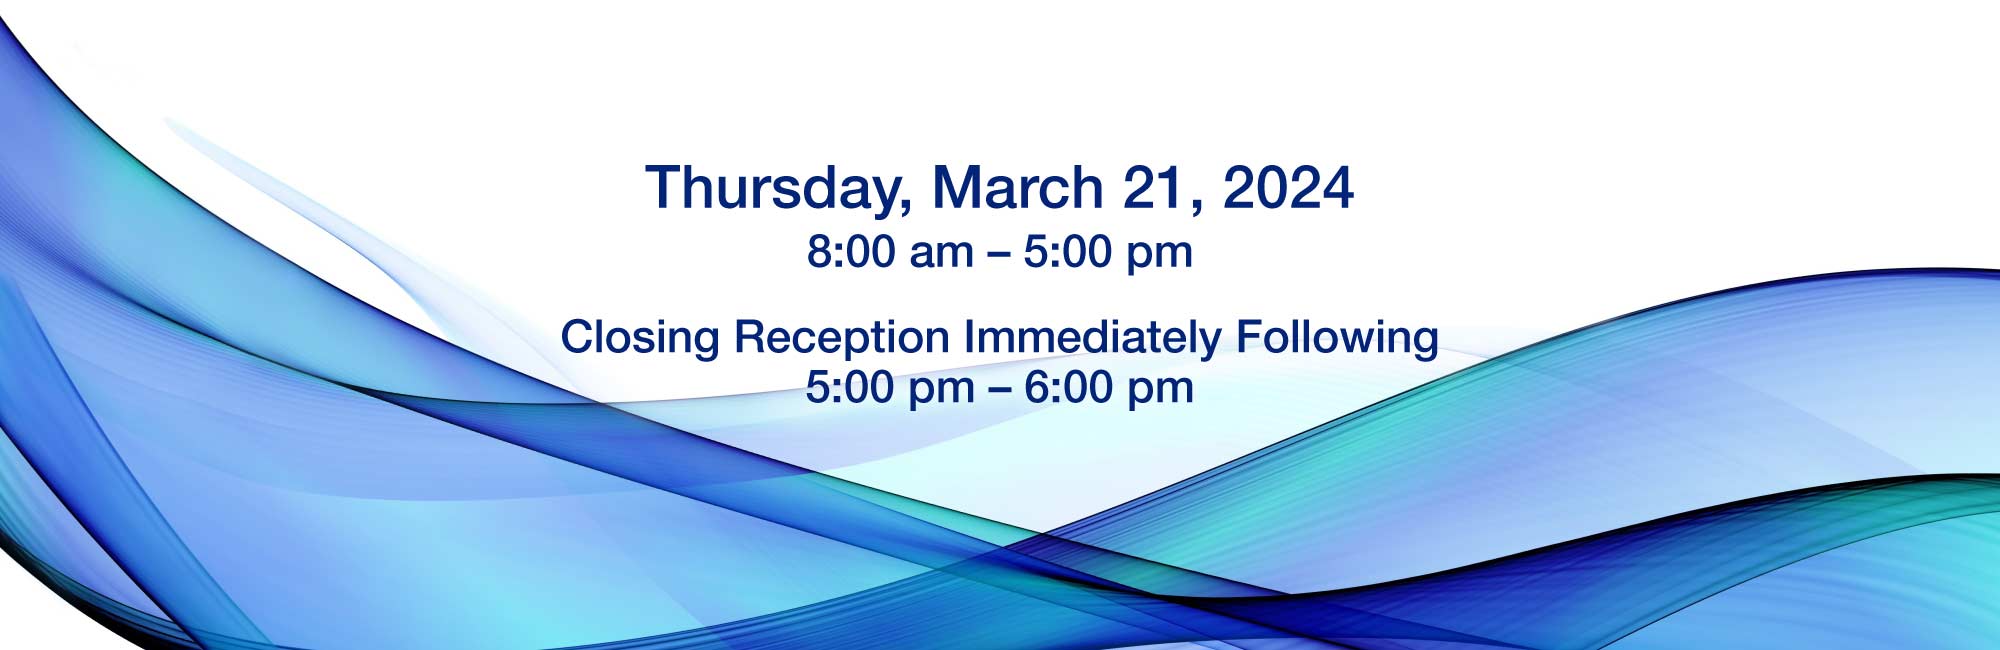 Thursday, March 21, 2024 8:00 am – 6:00 pm Closing Reception Immediately Following 6:00 pm – 7:00 pm